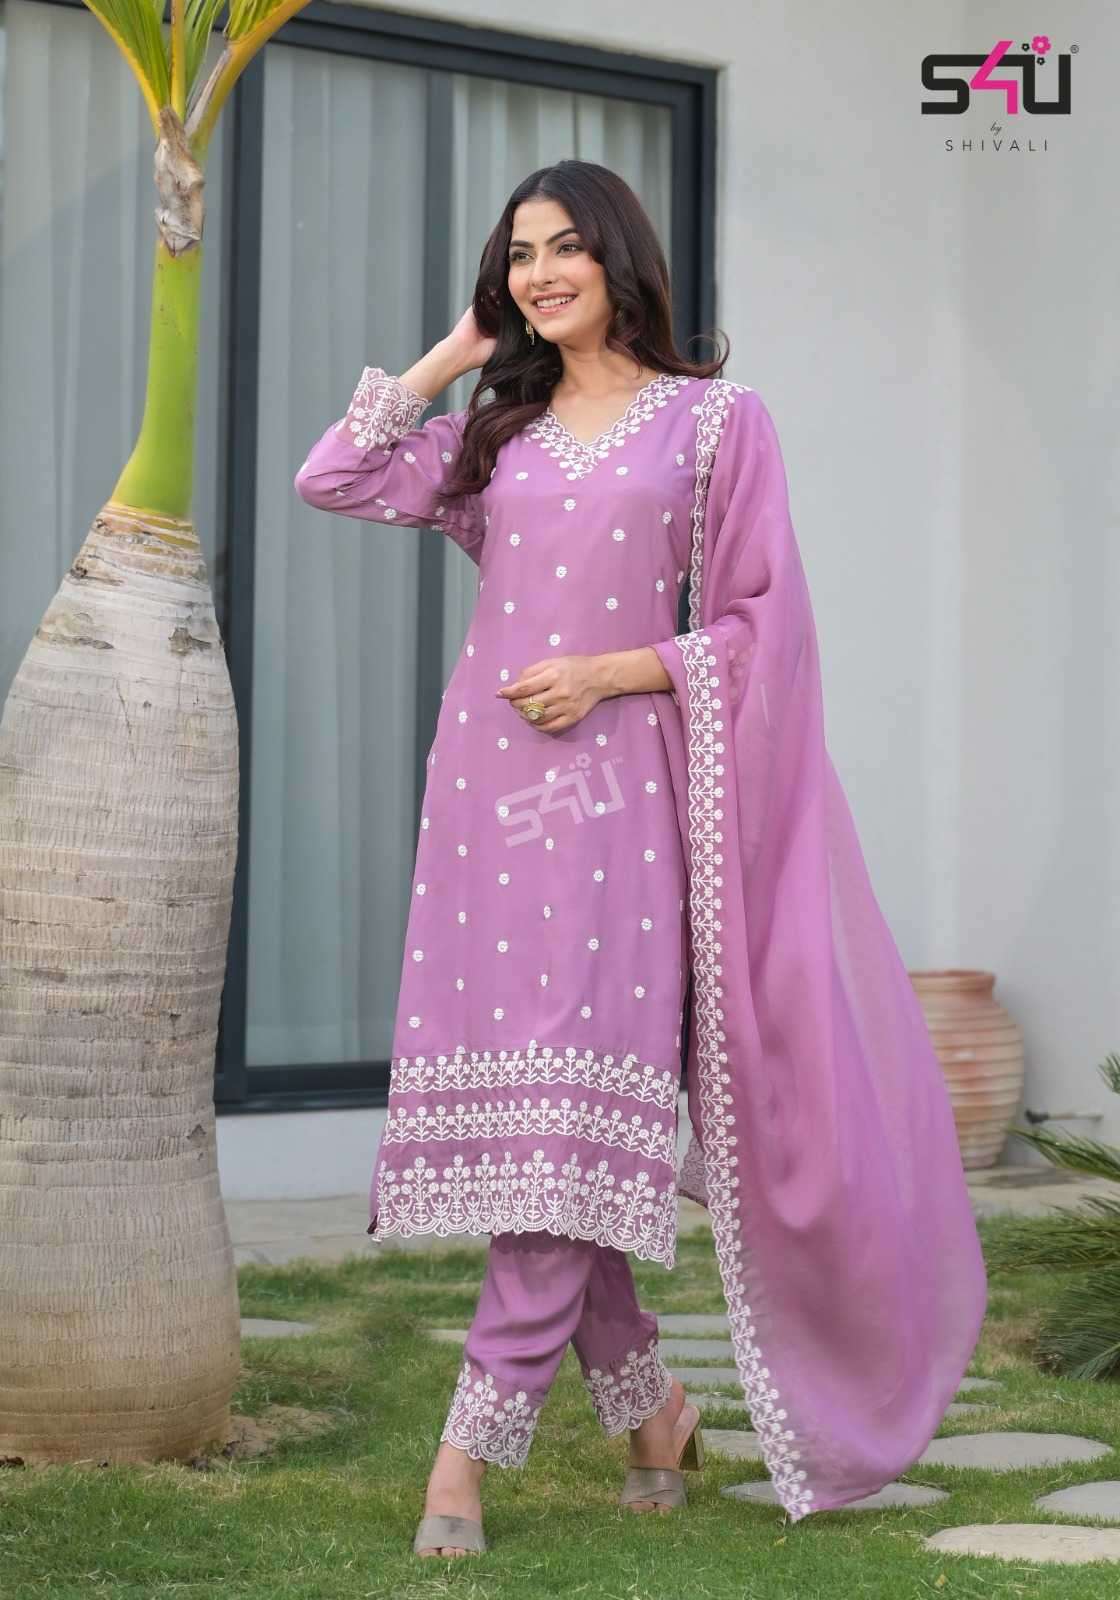 LIBAS VOL-2 SERIES 01 TO 05 BY S4U DESIGNER WITH WORK MUSLIN KURTI WITH PANT AND DUPATTA ARE AVAILABLE AT WHOLESALE PRICE